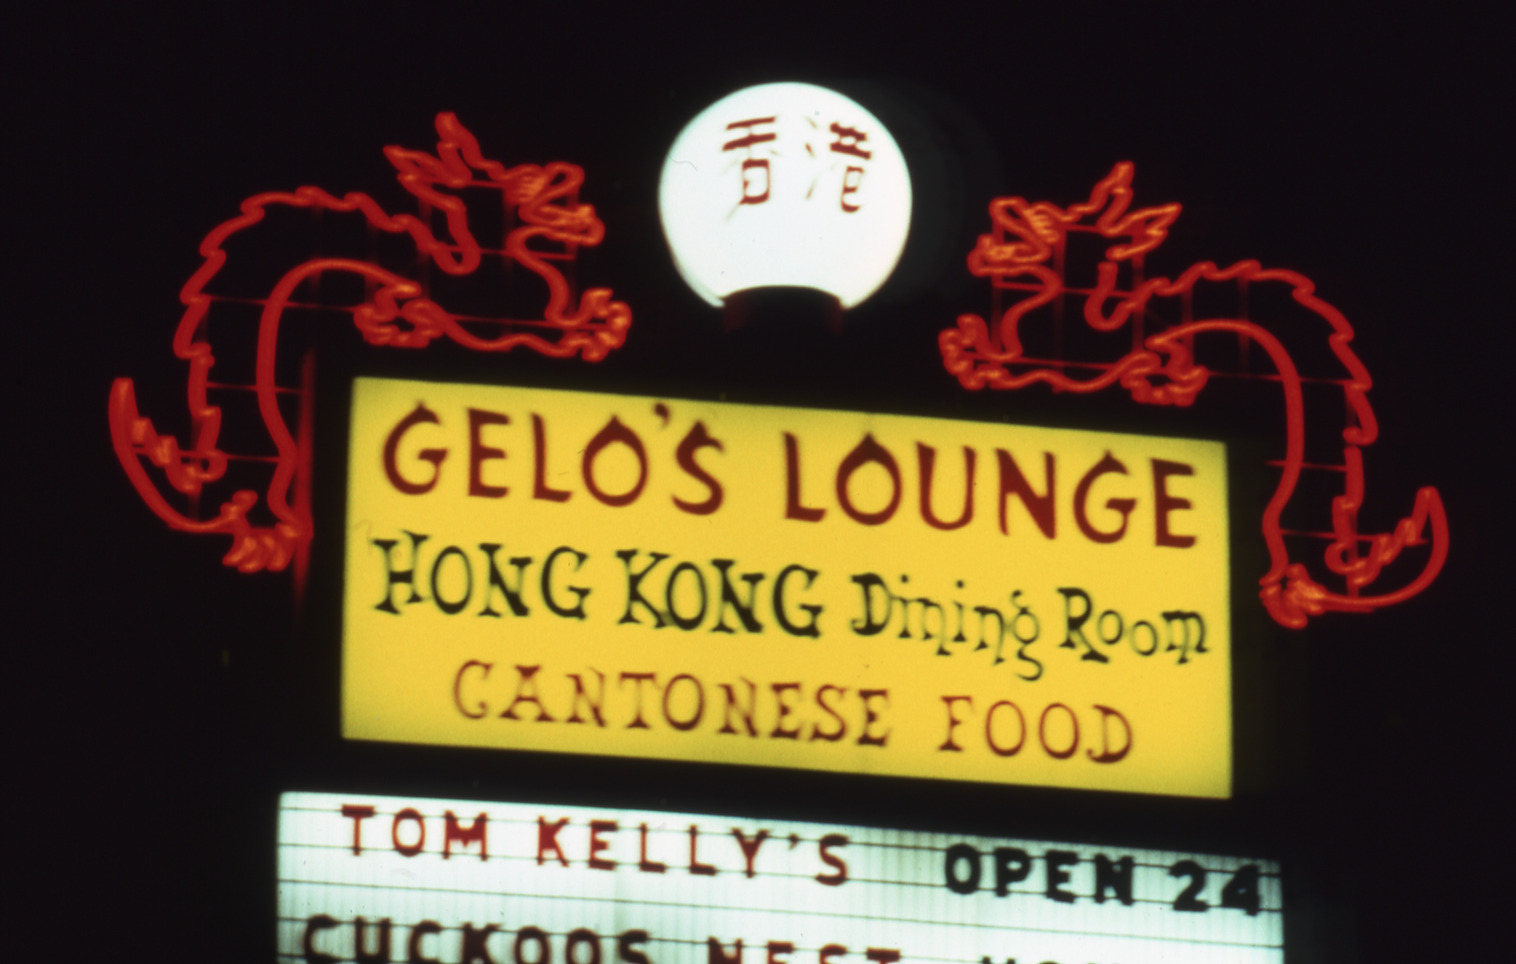 Gelo's Lounge marquee sign, Las Vegas, Nevada: photographic print